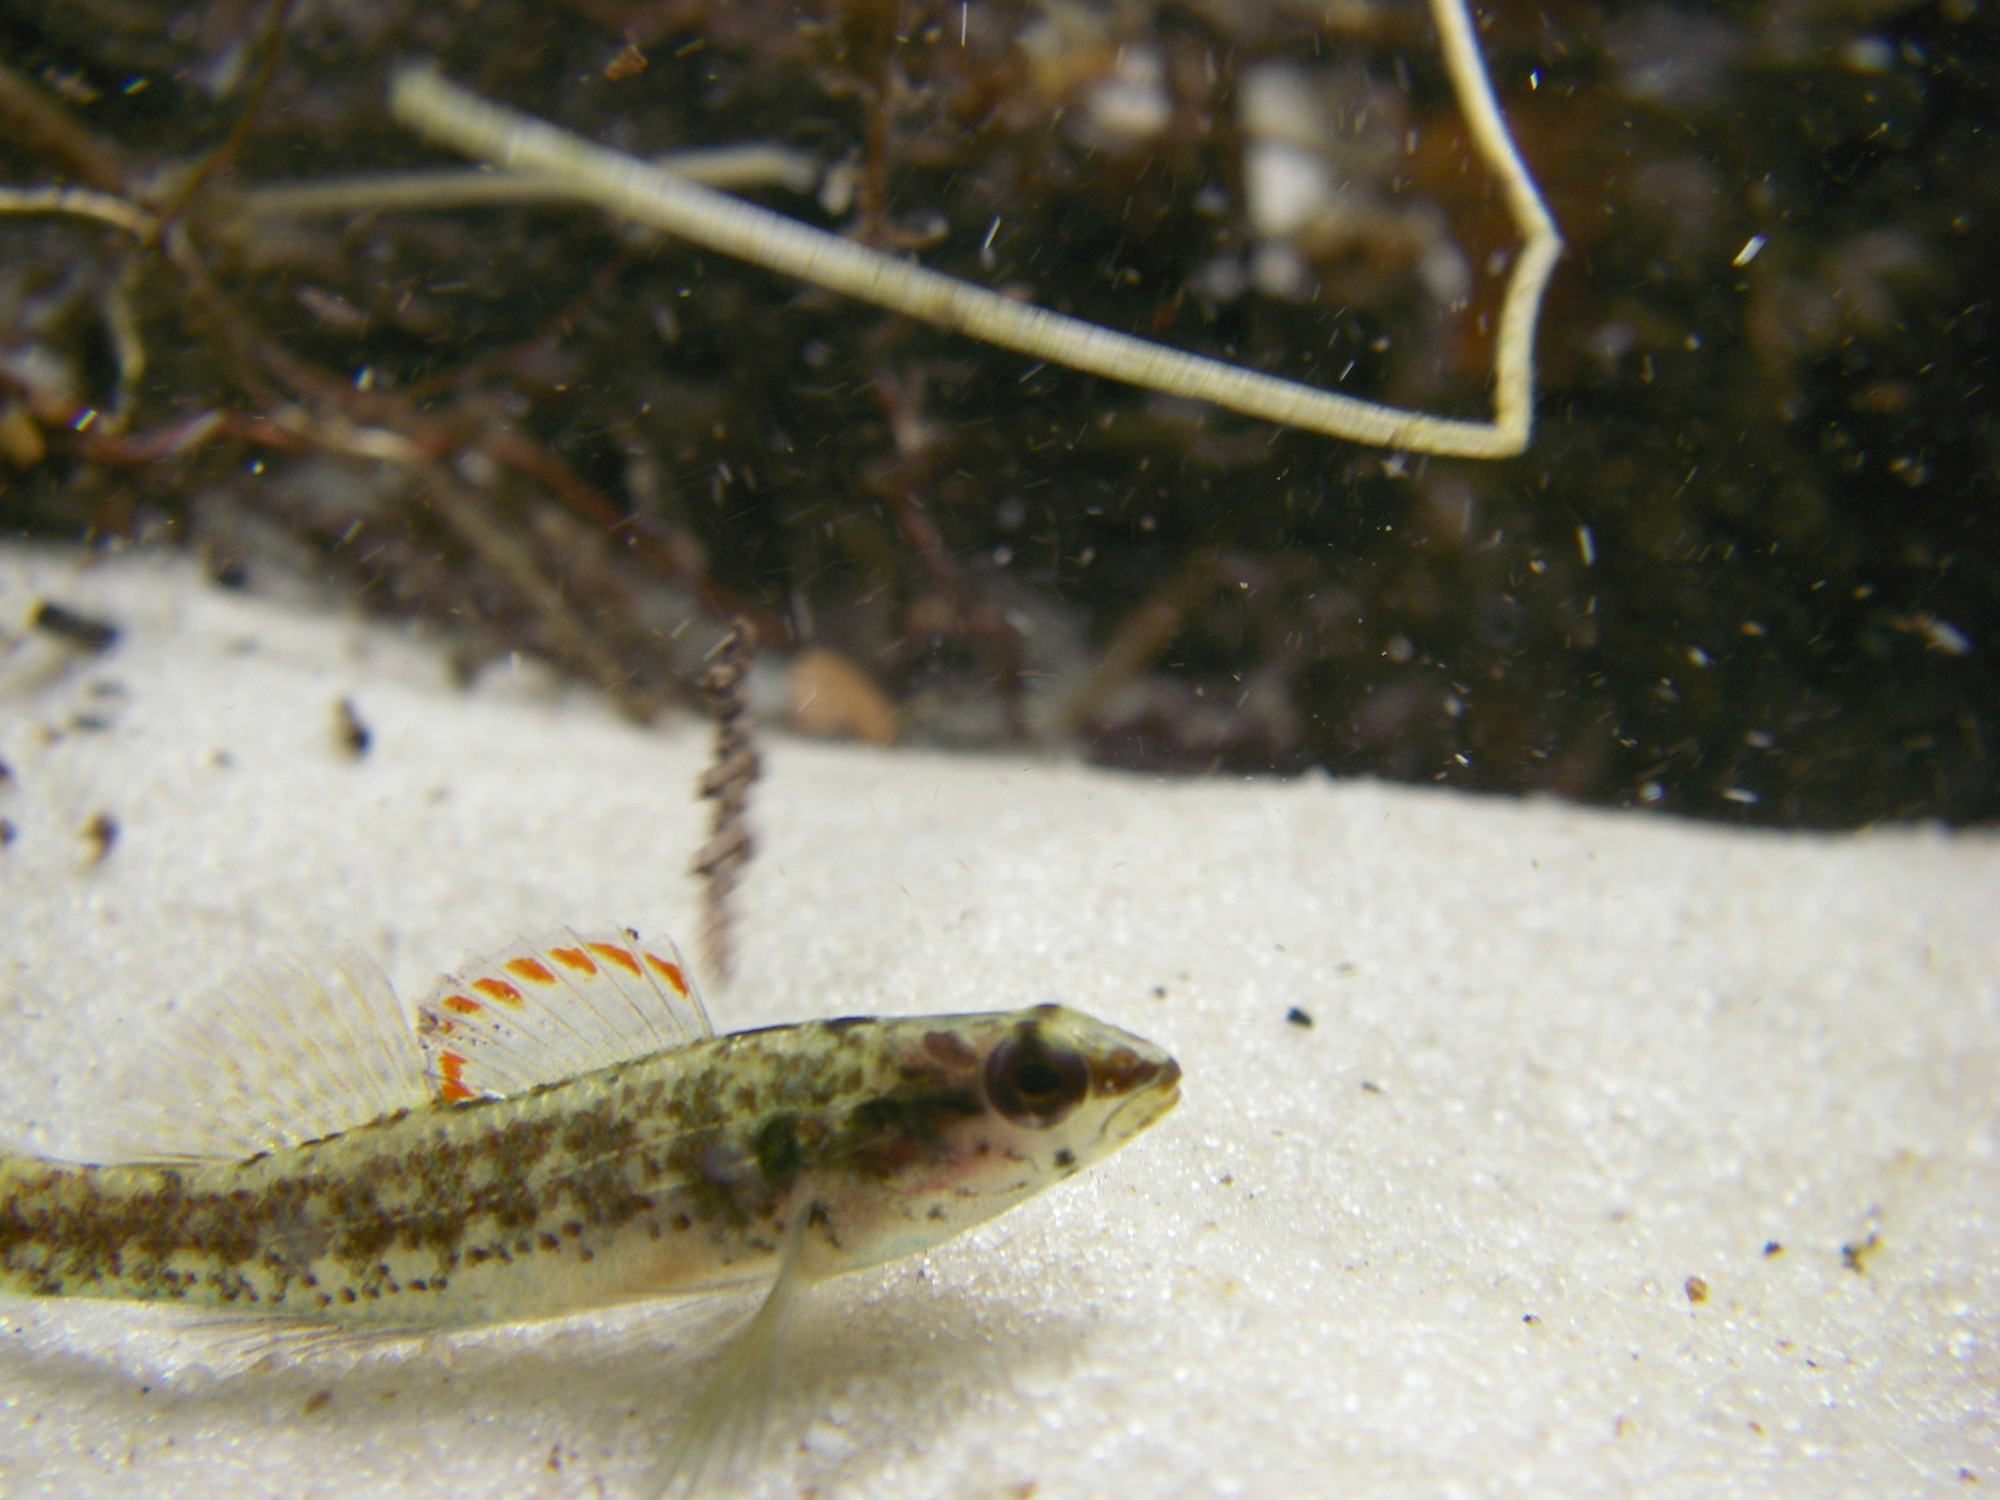 More than 95 percent of the habitat for the endangered Okaloosa darter resides at Eglin Air Force Base, Fla. Efforts on the installation have led to a proposal to down-list the species from endangered to threatened status. (U.S. Air Force photo)